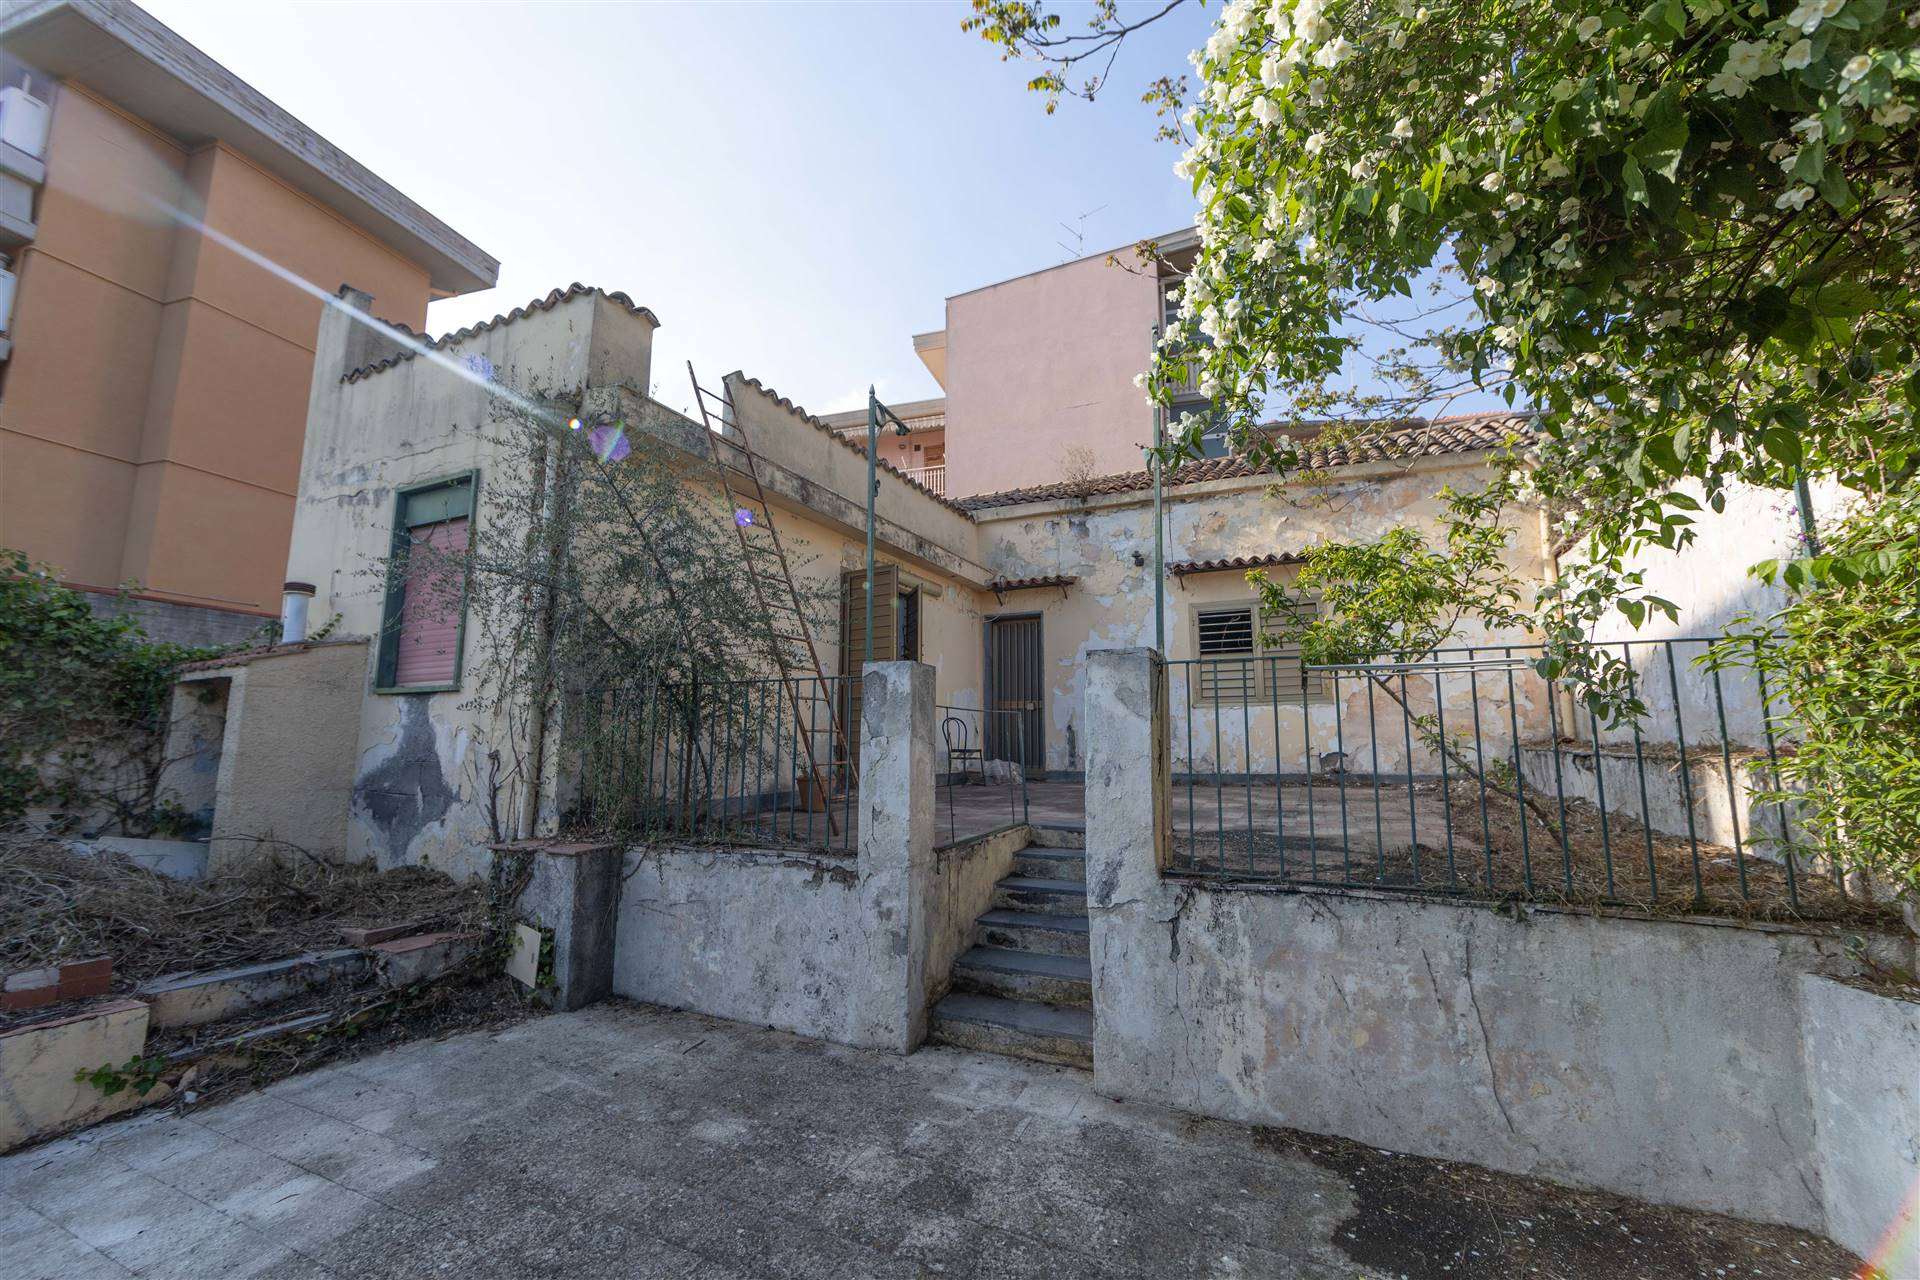 TREMESTIERI ETNEO, Single house for sale of 84 Sq. mt., Be restored, Heating Non-existent, placed at Ground, composed by: 2 Rooms, , 1 Bedroom, 1 